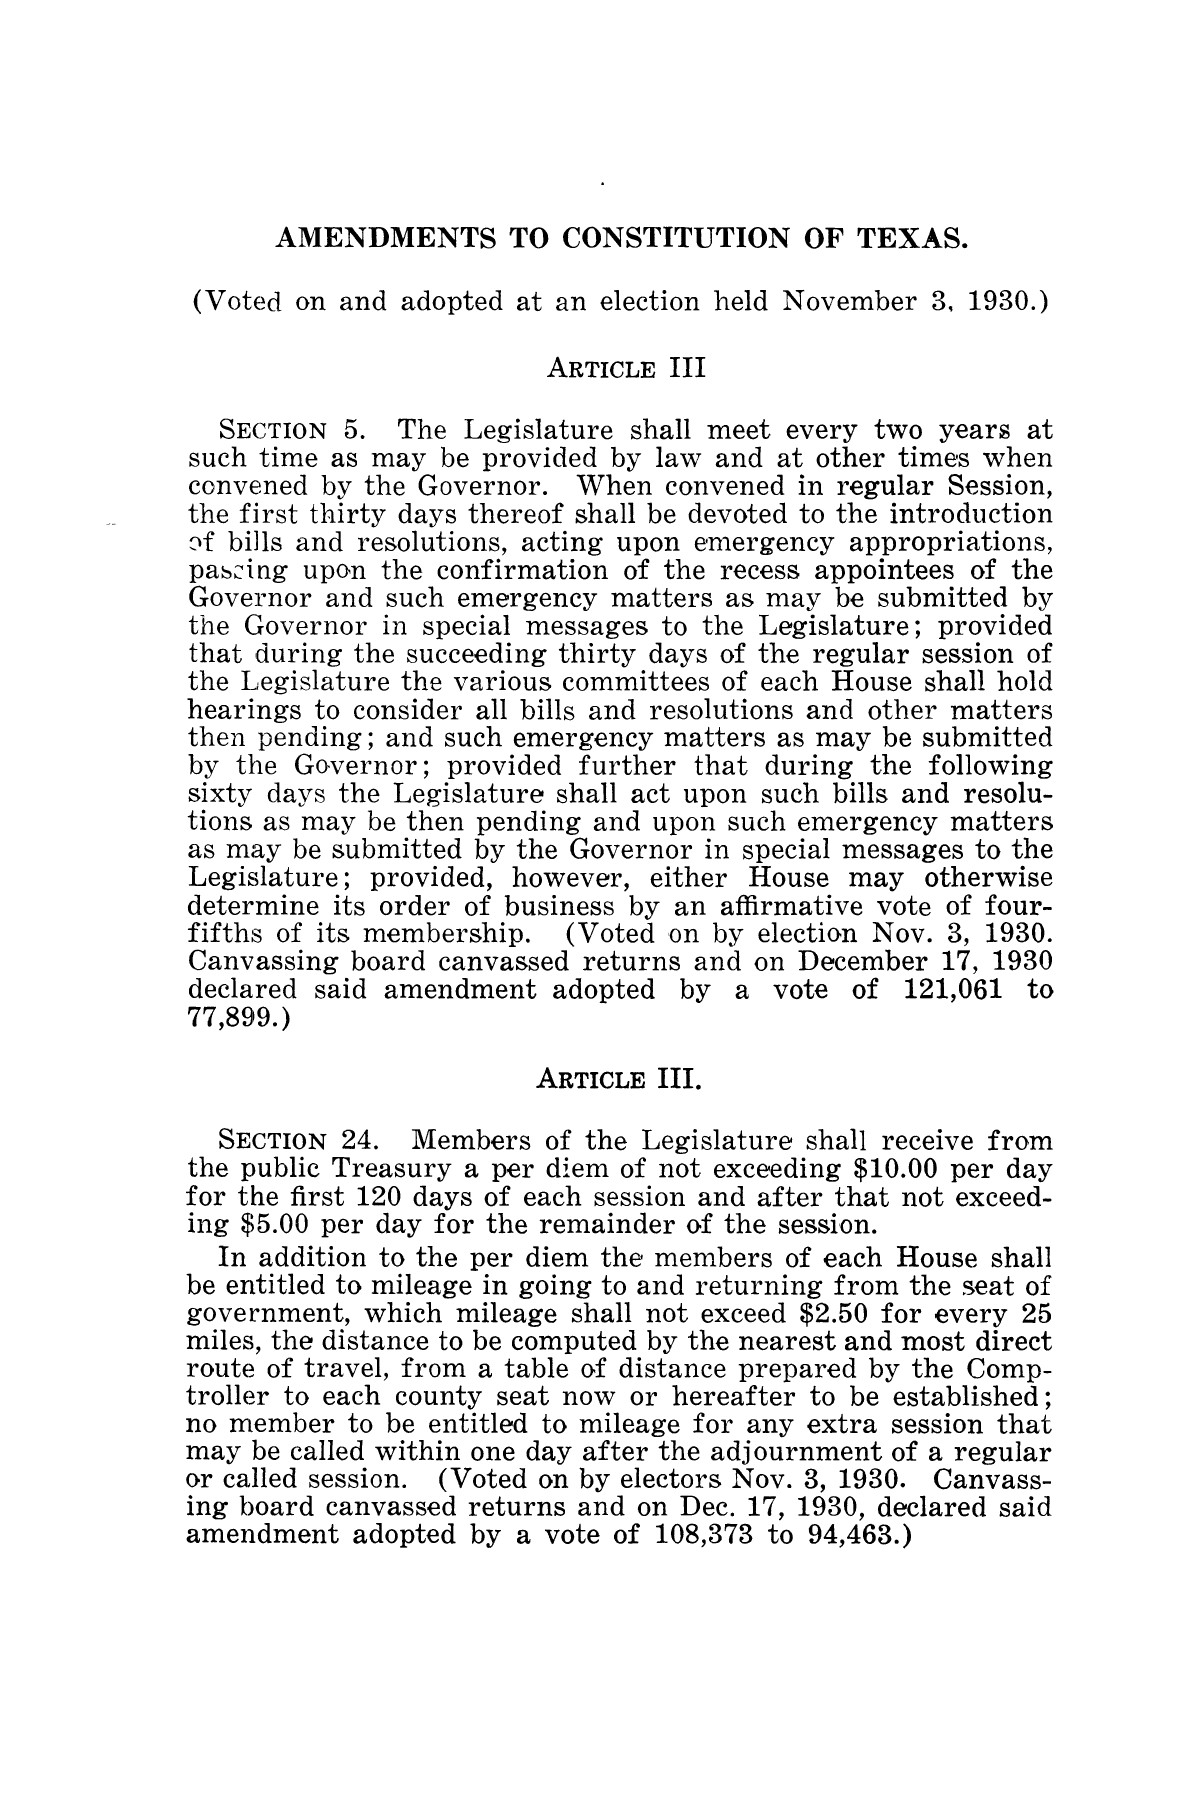 The Laws of Texas, 1929-1931 [Volume 27]
                                                
                                                    [Sequence #]: 439 of 1943
                                                